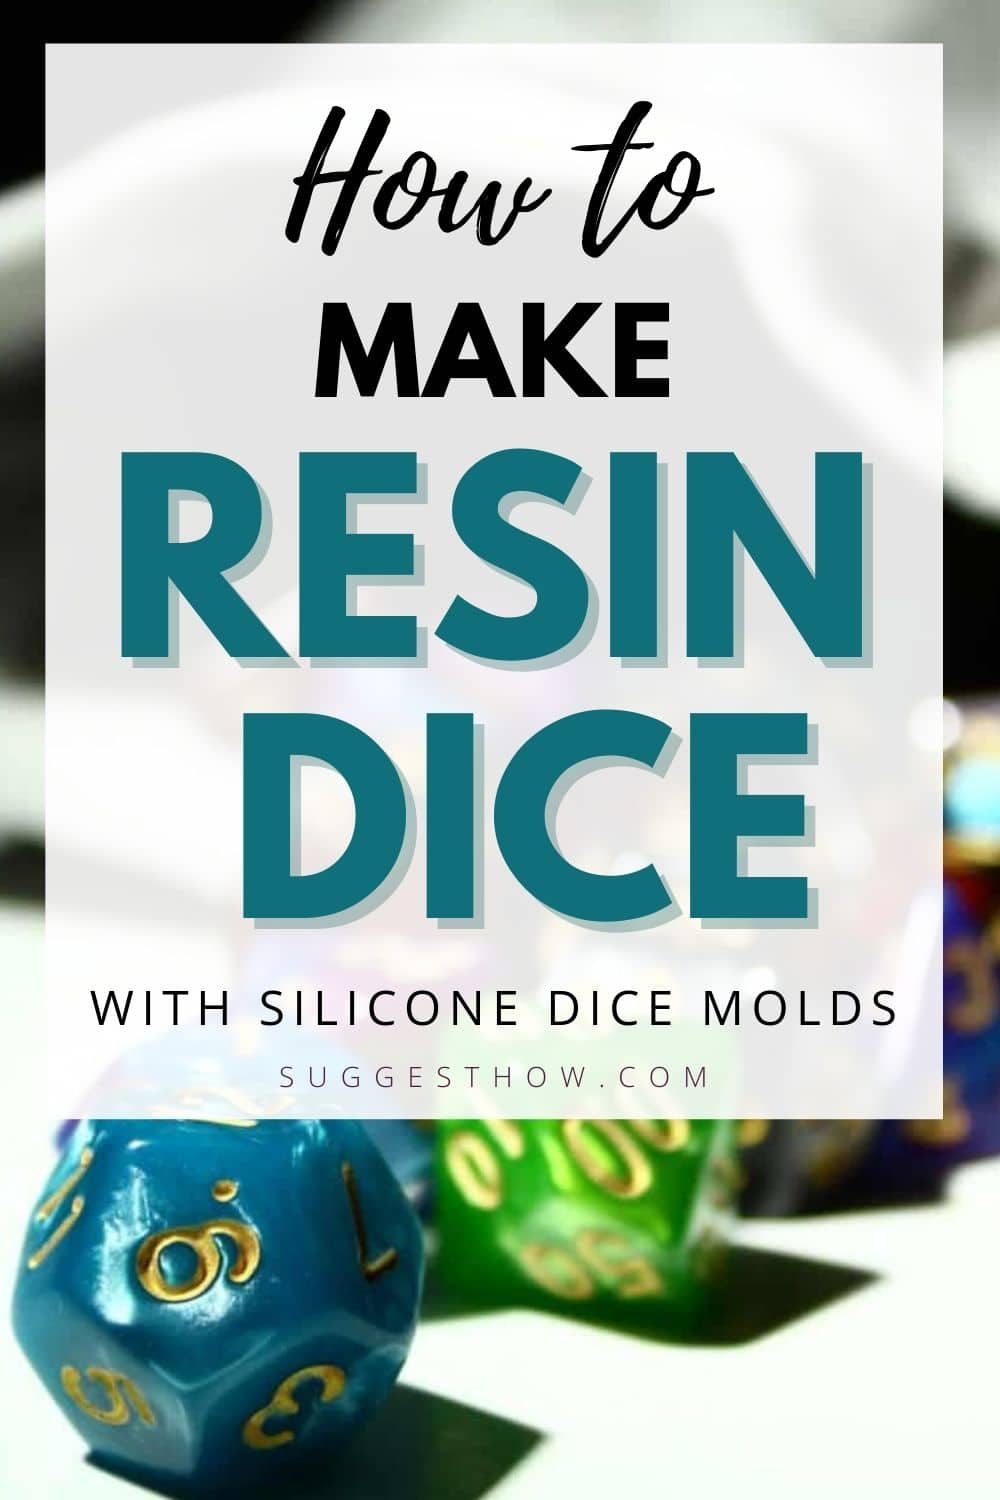 How to Make Resin Dice with Silicone Dice Molds